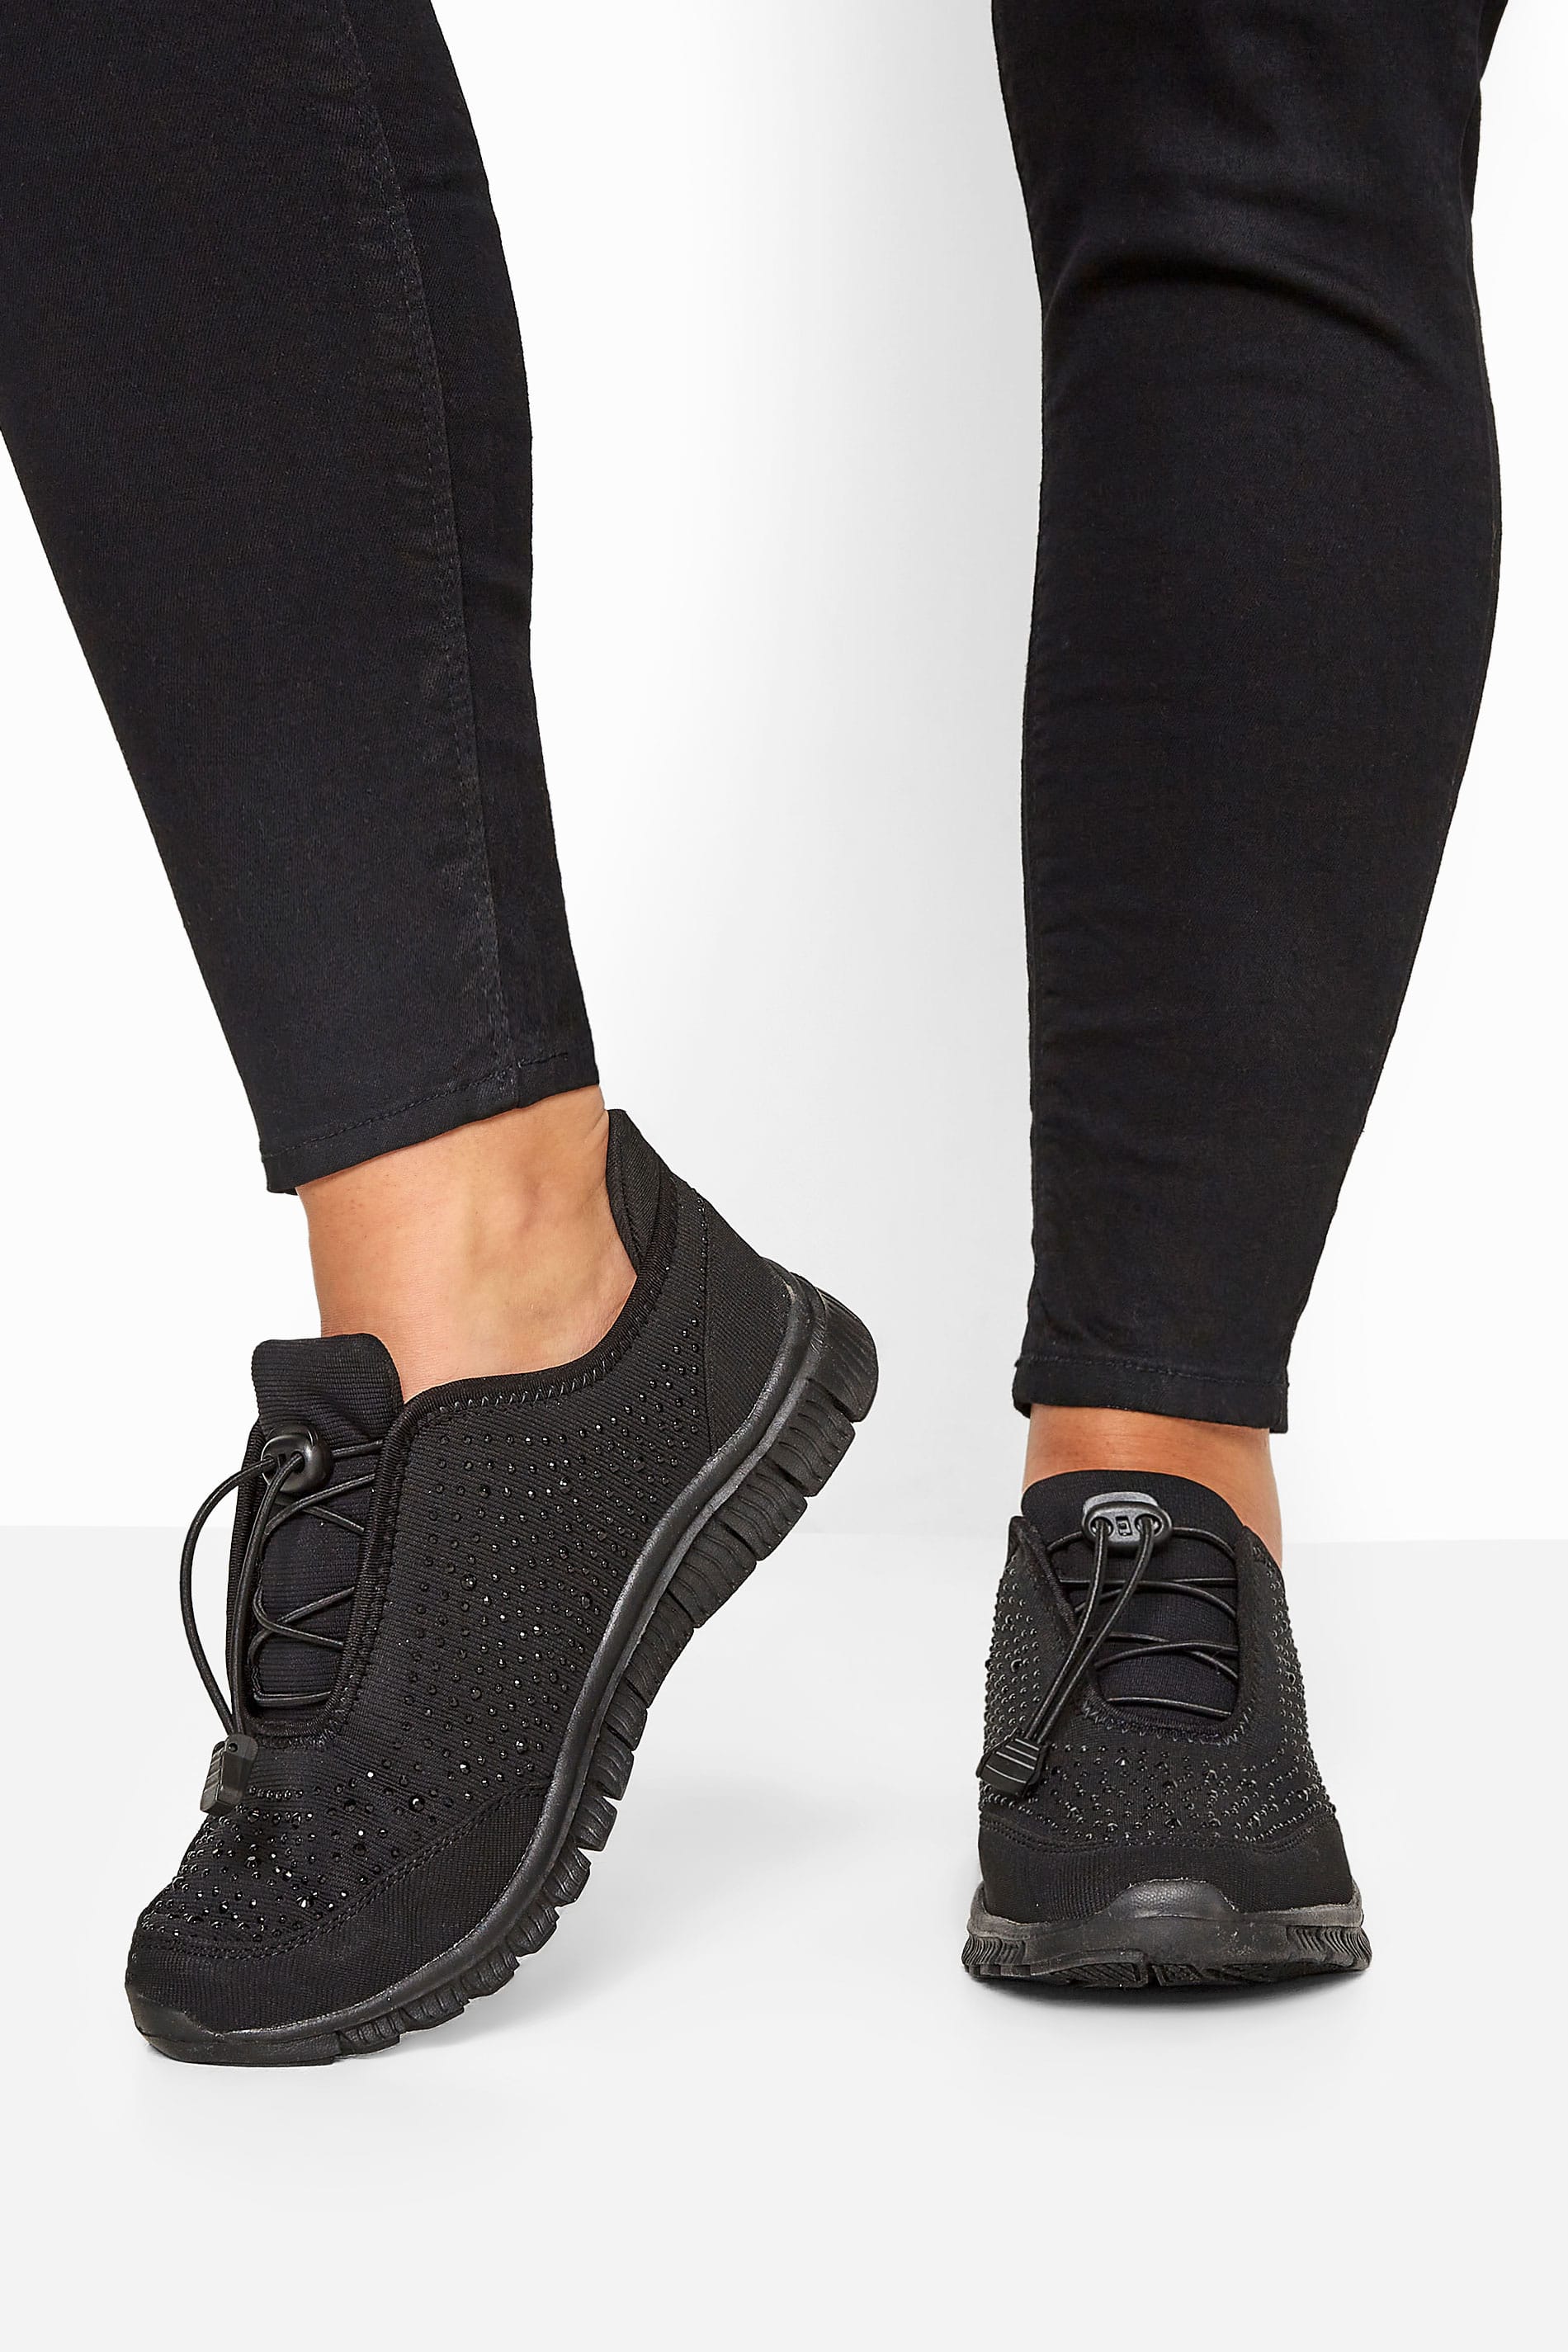 Black Embellished Drawcord Trainers In Extra Wide EEE Fit_6ab4.jpg